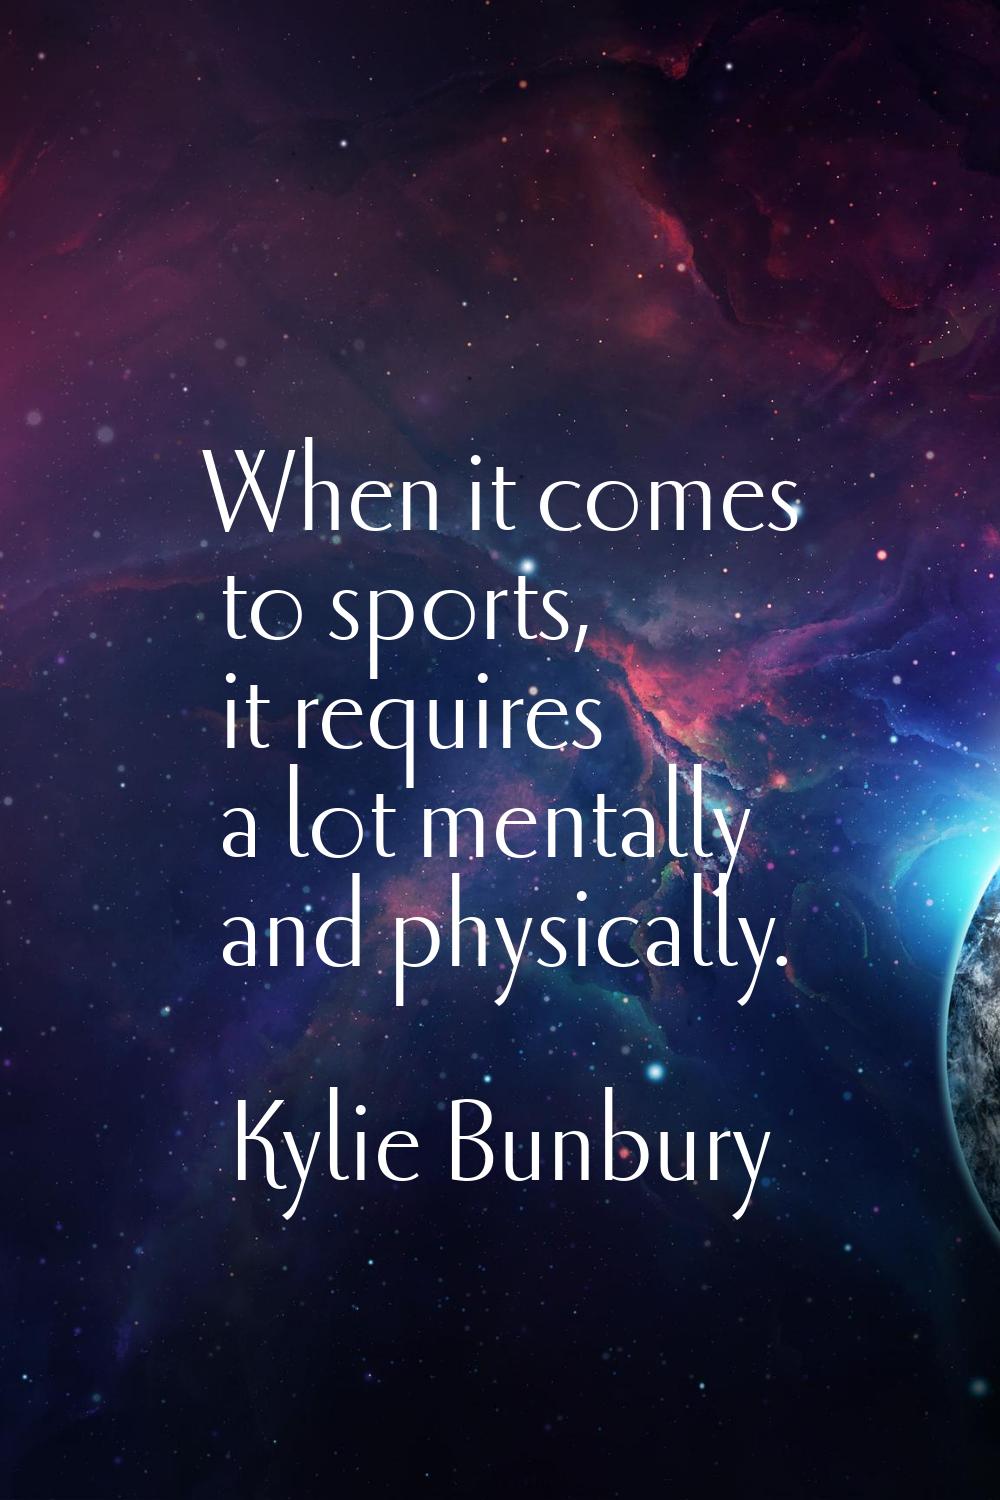 When it comes to sports, it requires a lot mentally and physically.